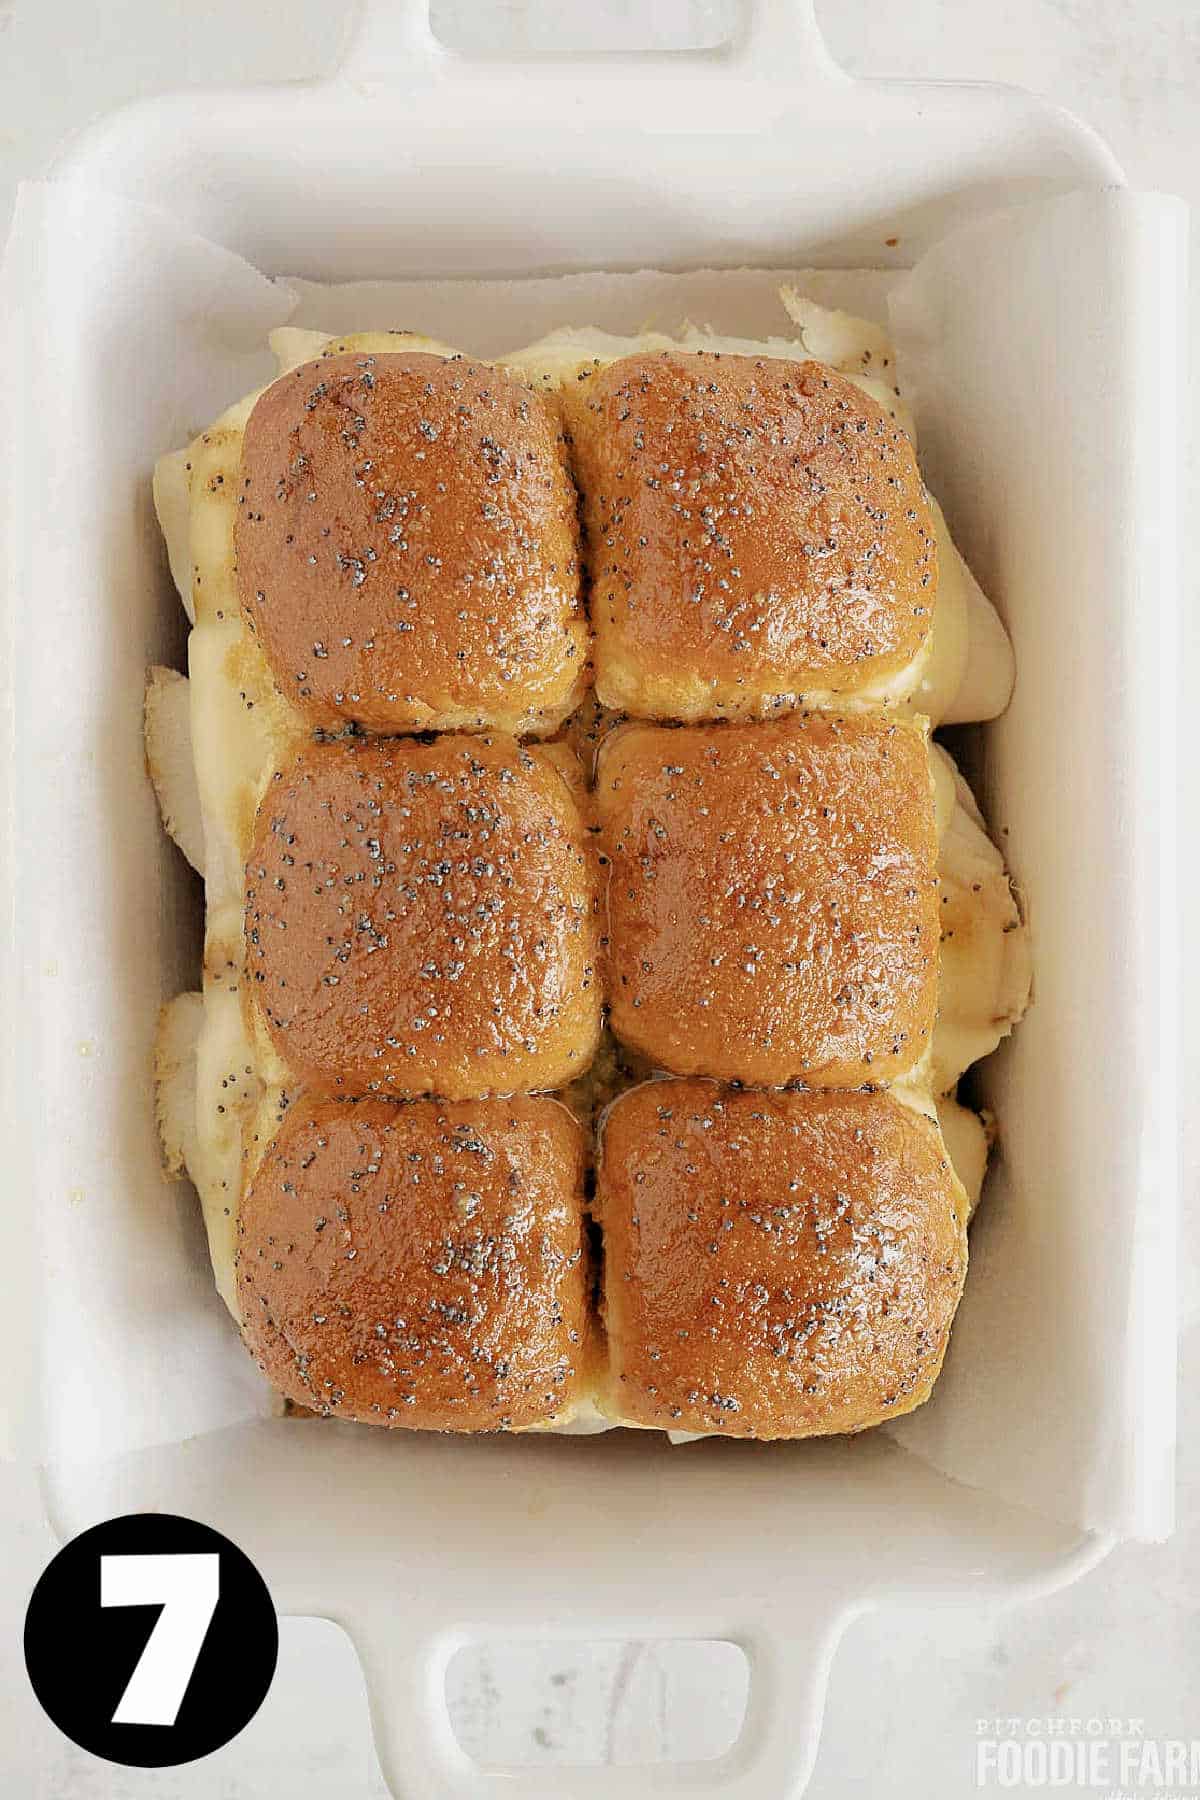 Baked sliders with poppy seed glaze on top.